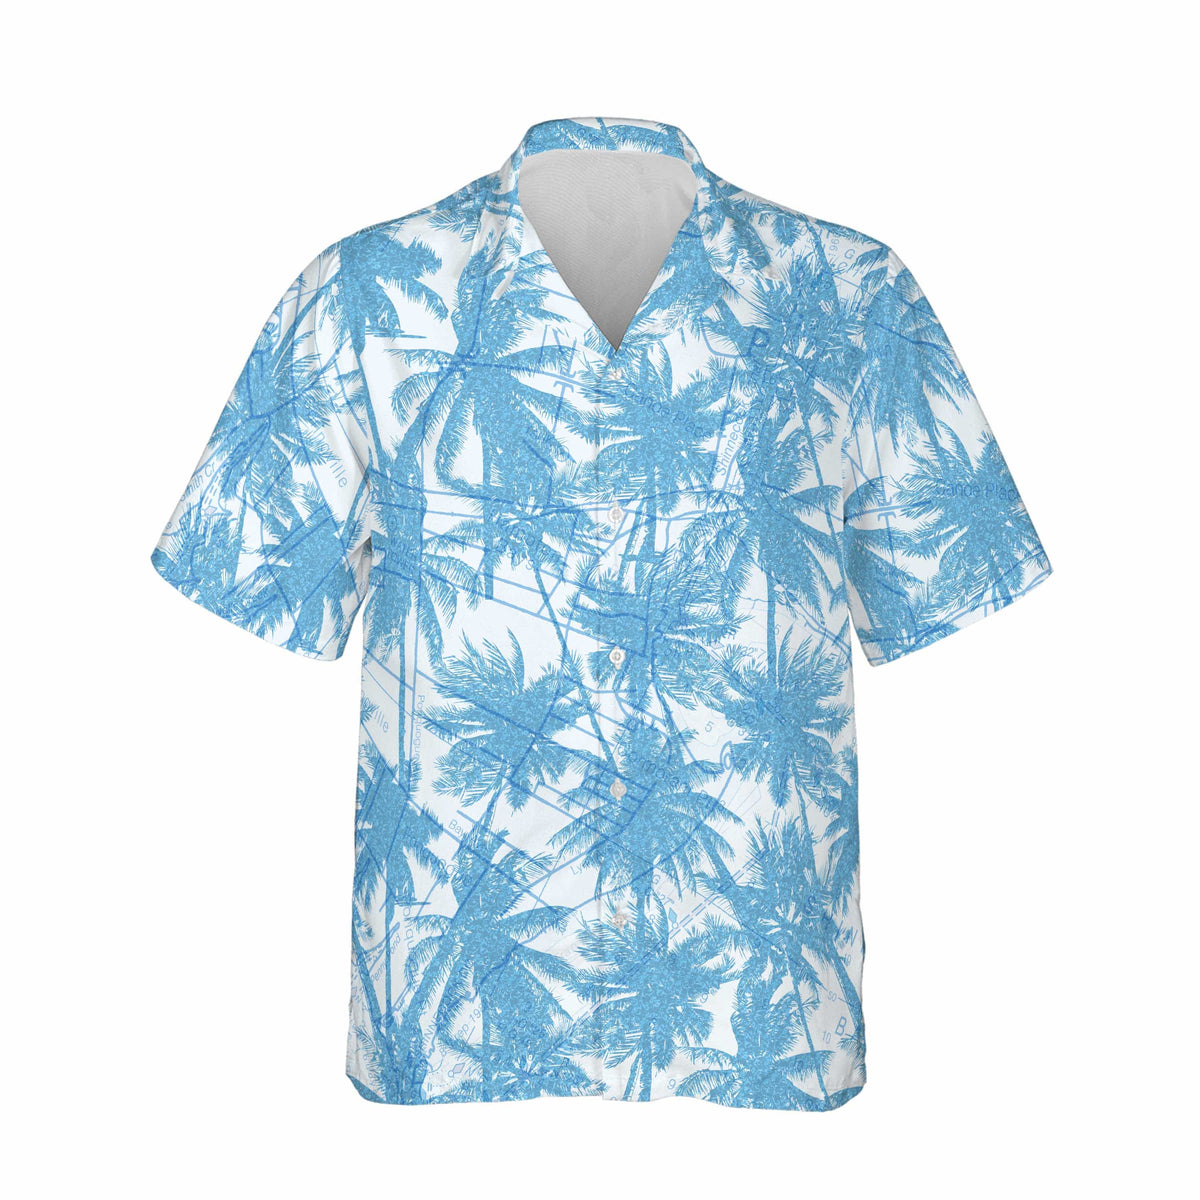 The Cool Blue Palms of Shinnecock Canal Shirt - Top Deck Gear